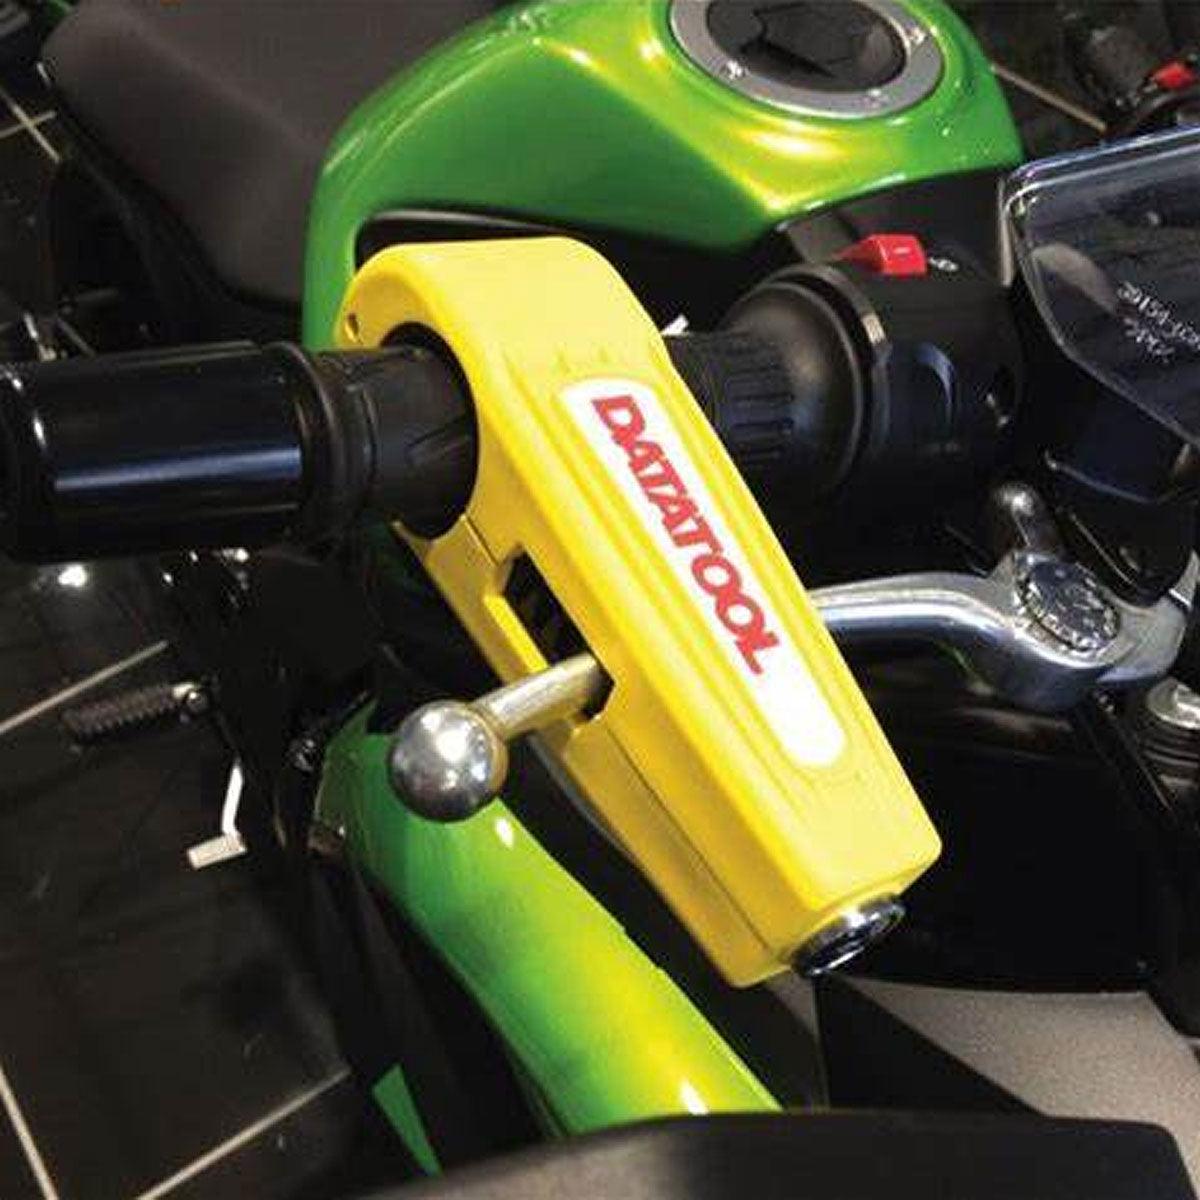 Croc Lock Motorcycle & Scooter Throttle & Brake Security Lock - Browse our range of Accessories: Security - getgearedshop 